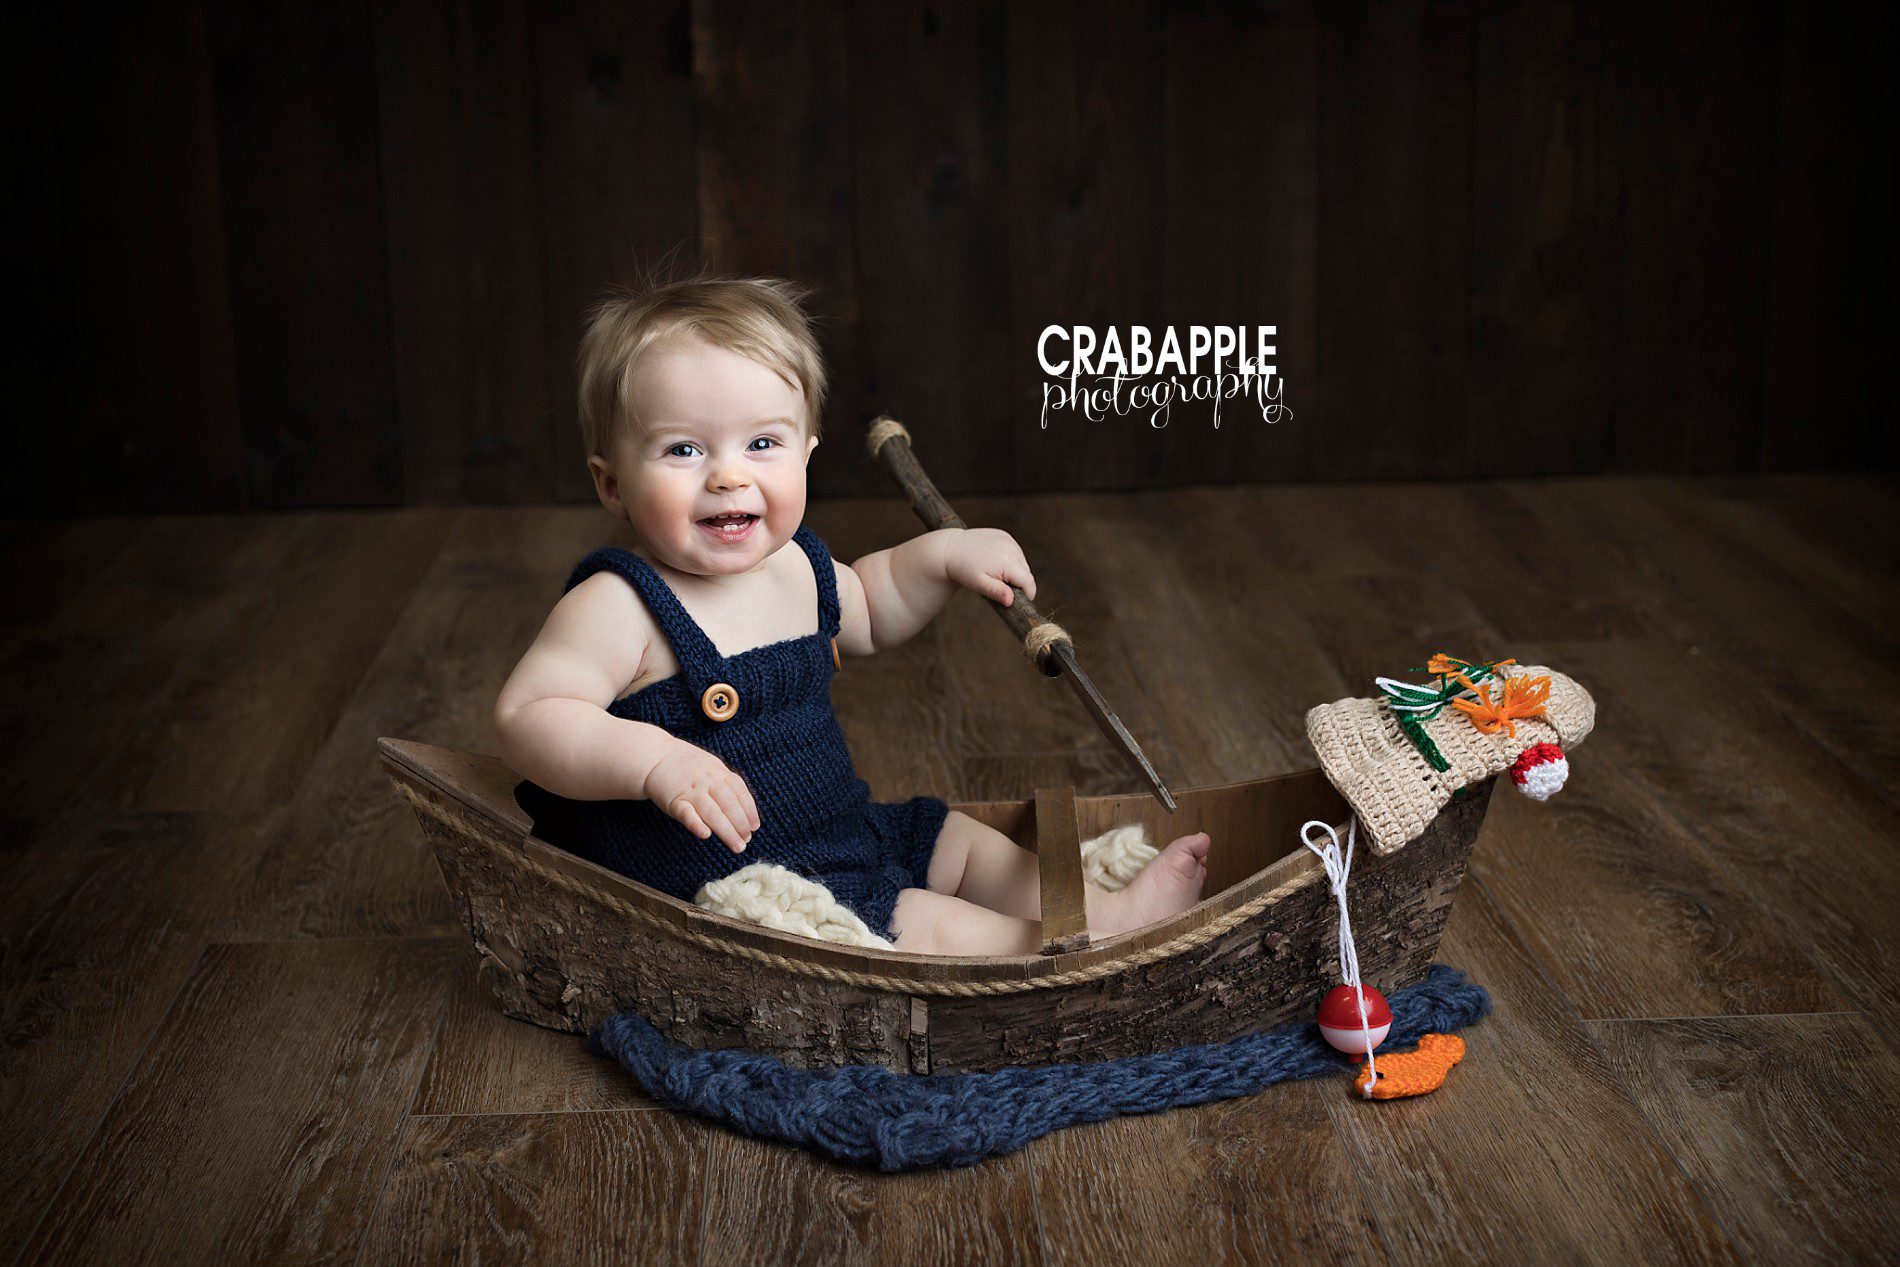 fun fishing themed photos for 9 month old baby sitter session ipswich ma photographer